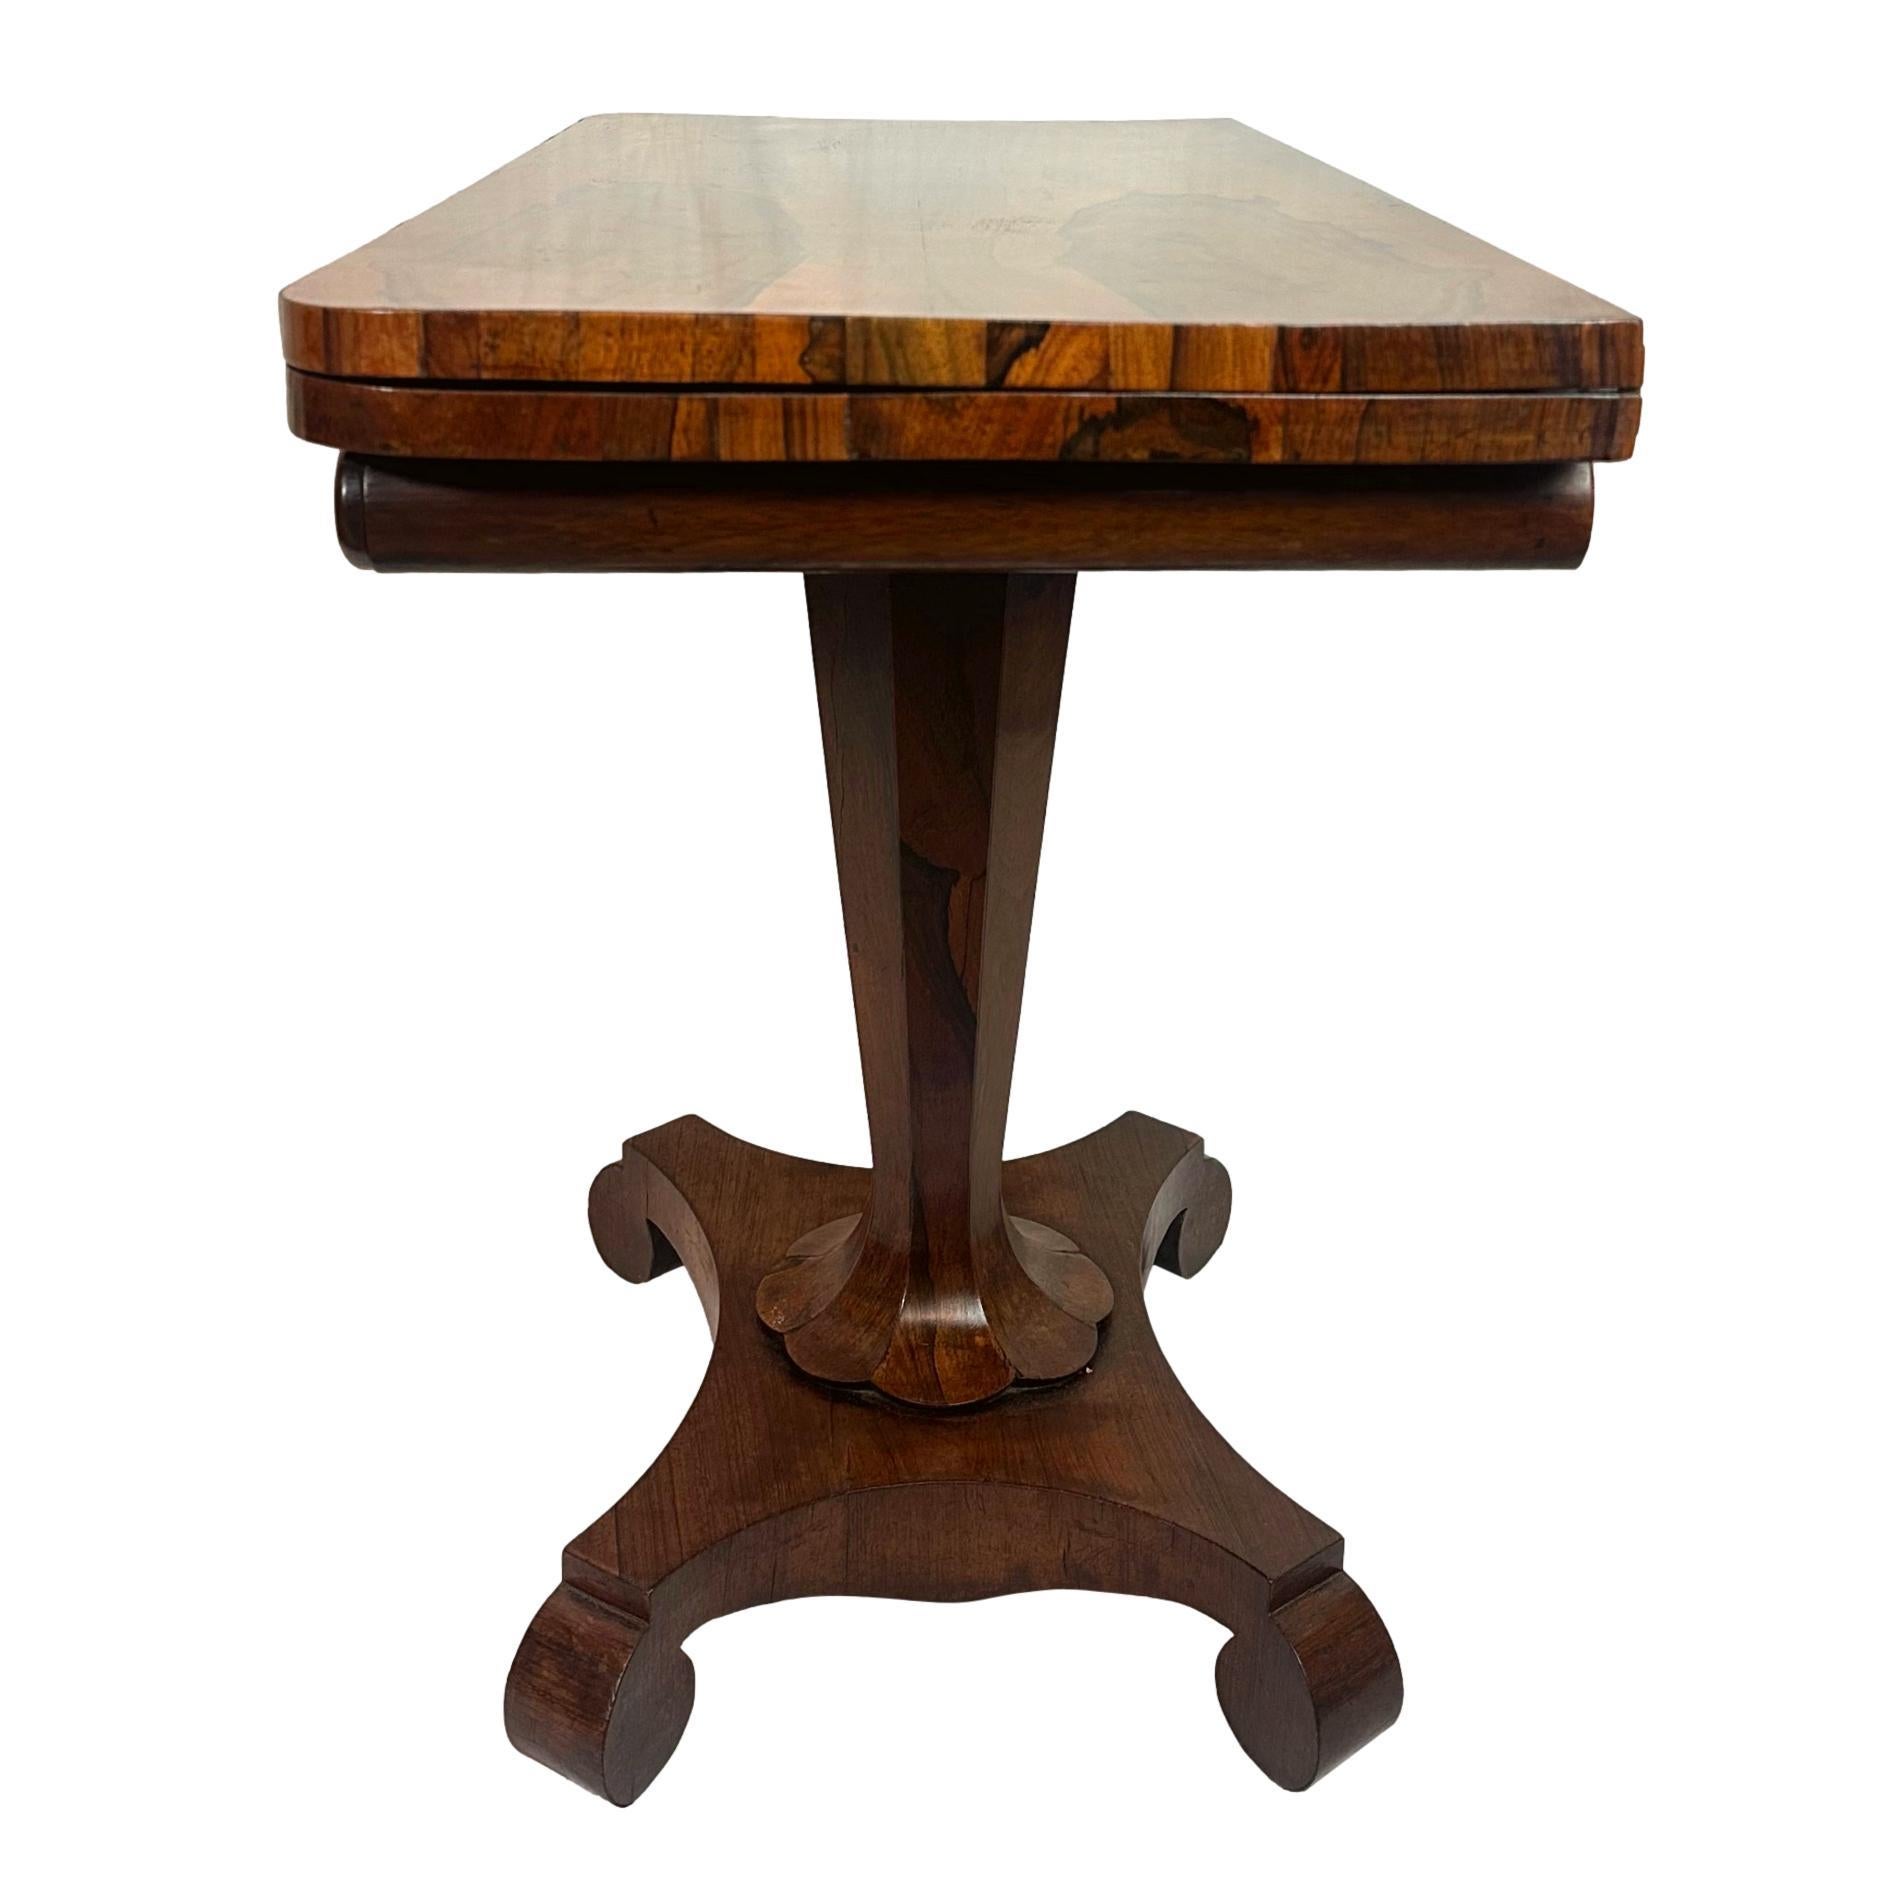 An Antique William IV Rosewood Period Card Table & Side Table, English, ca. 1835 For Sale 1